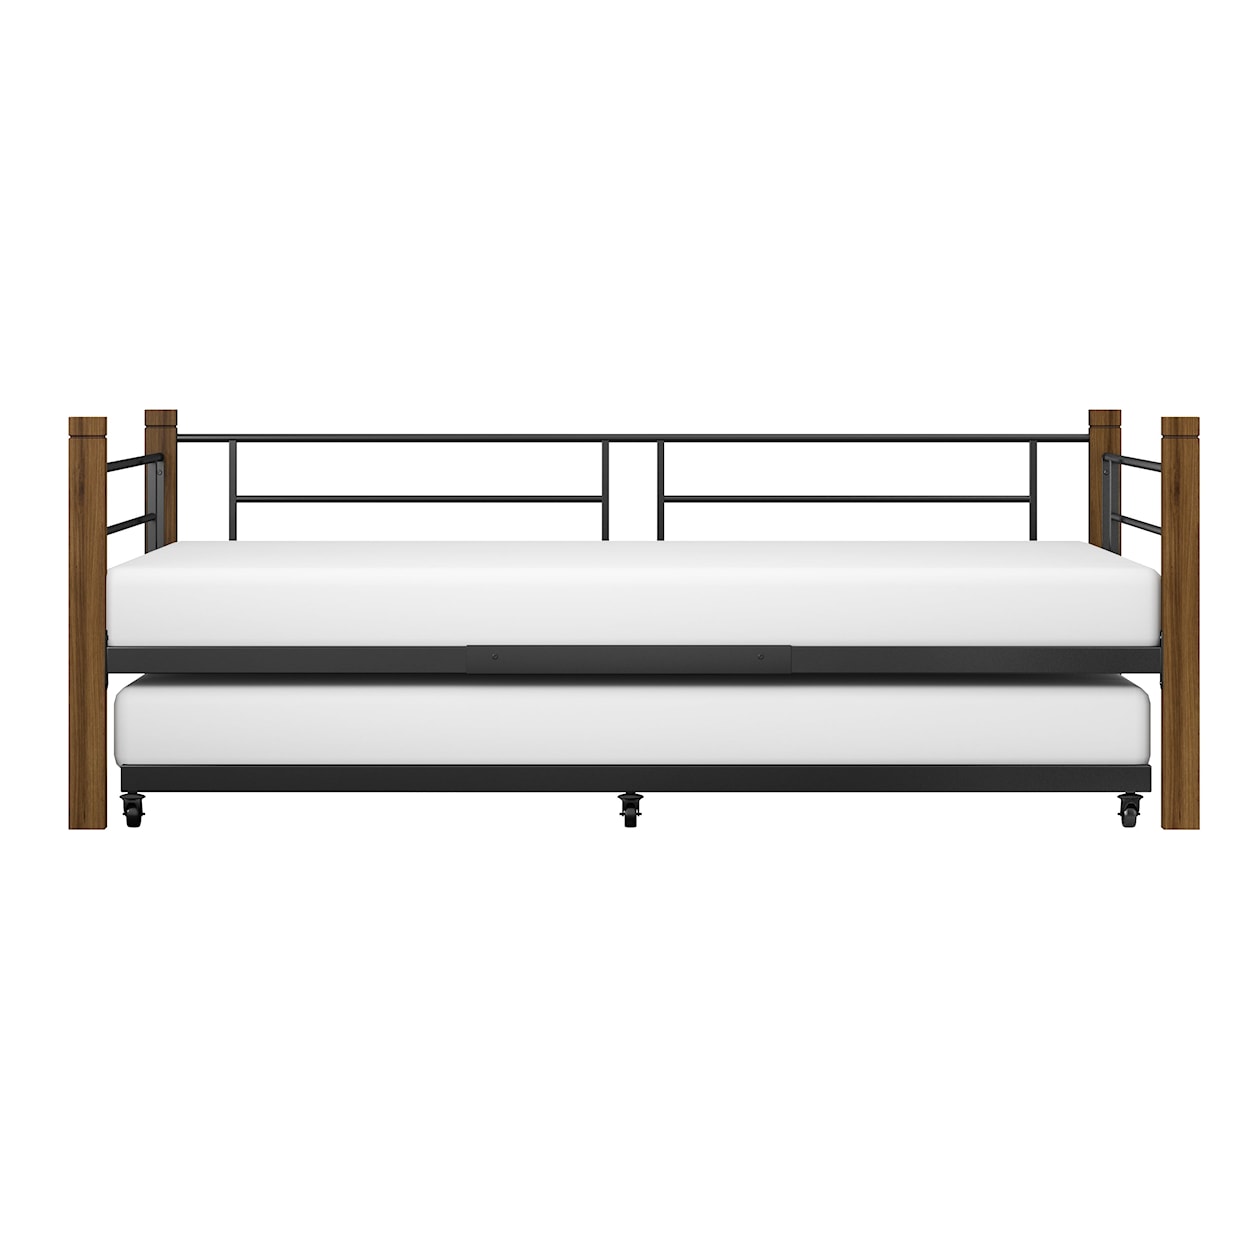 Hillsdale Raymond Metal Twin Daybed